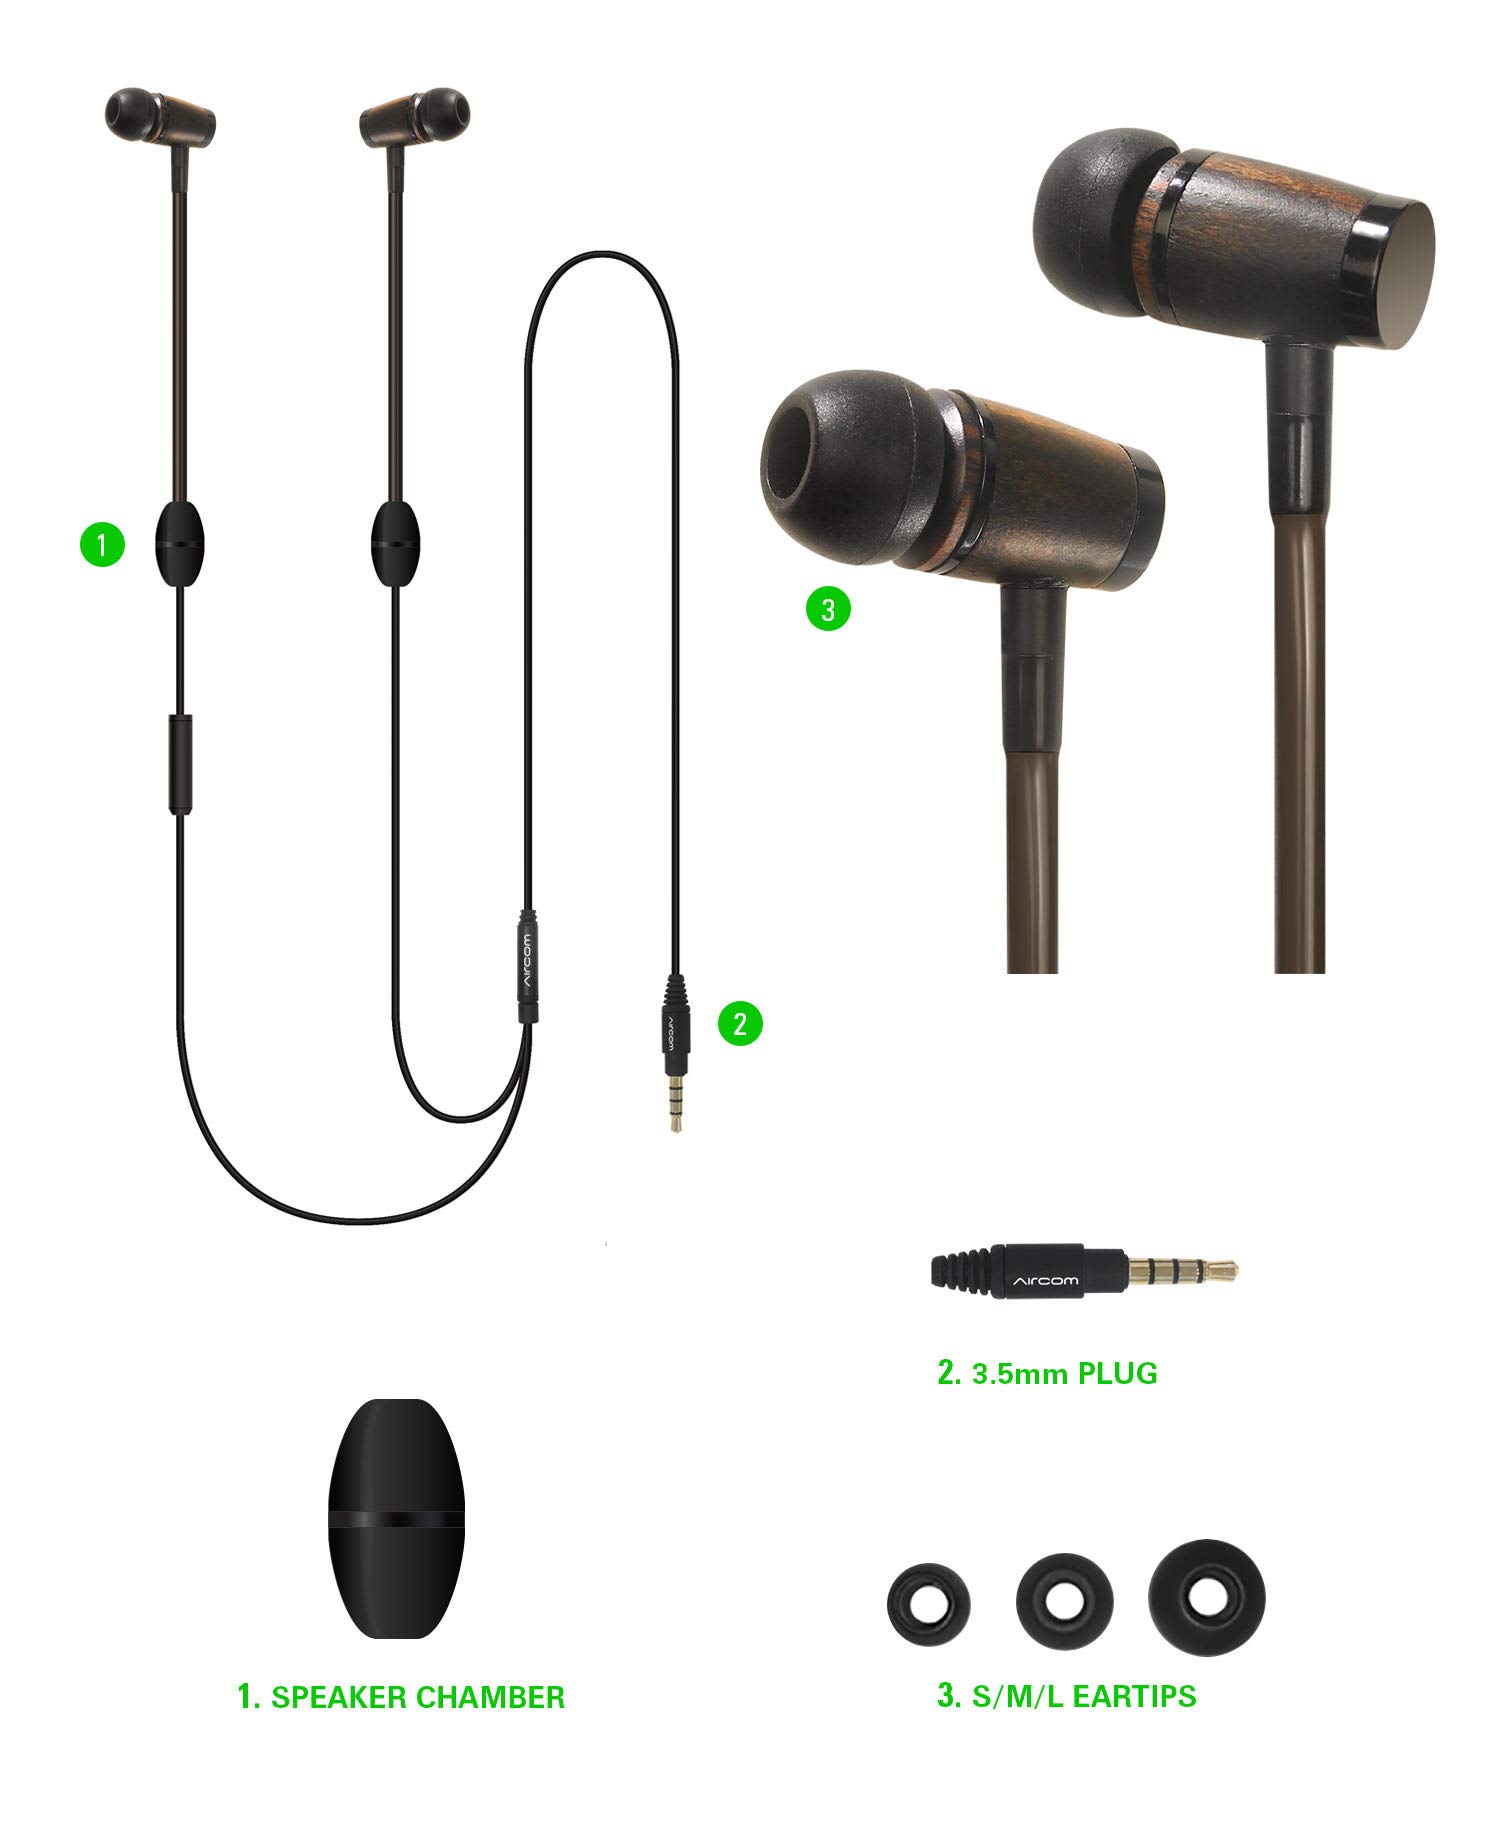 Aircom A6 Anti-Radiation Air Tube Headphone - Airflow Audio Technology for Premium Sound and EMF Protection – Wooden Earbuds with Built-in Microphone